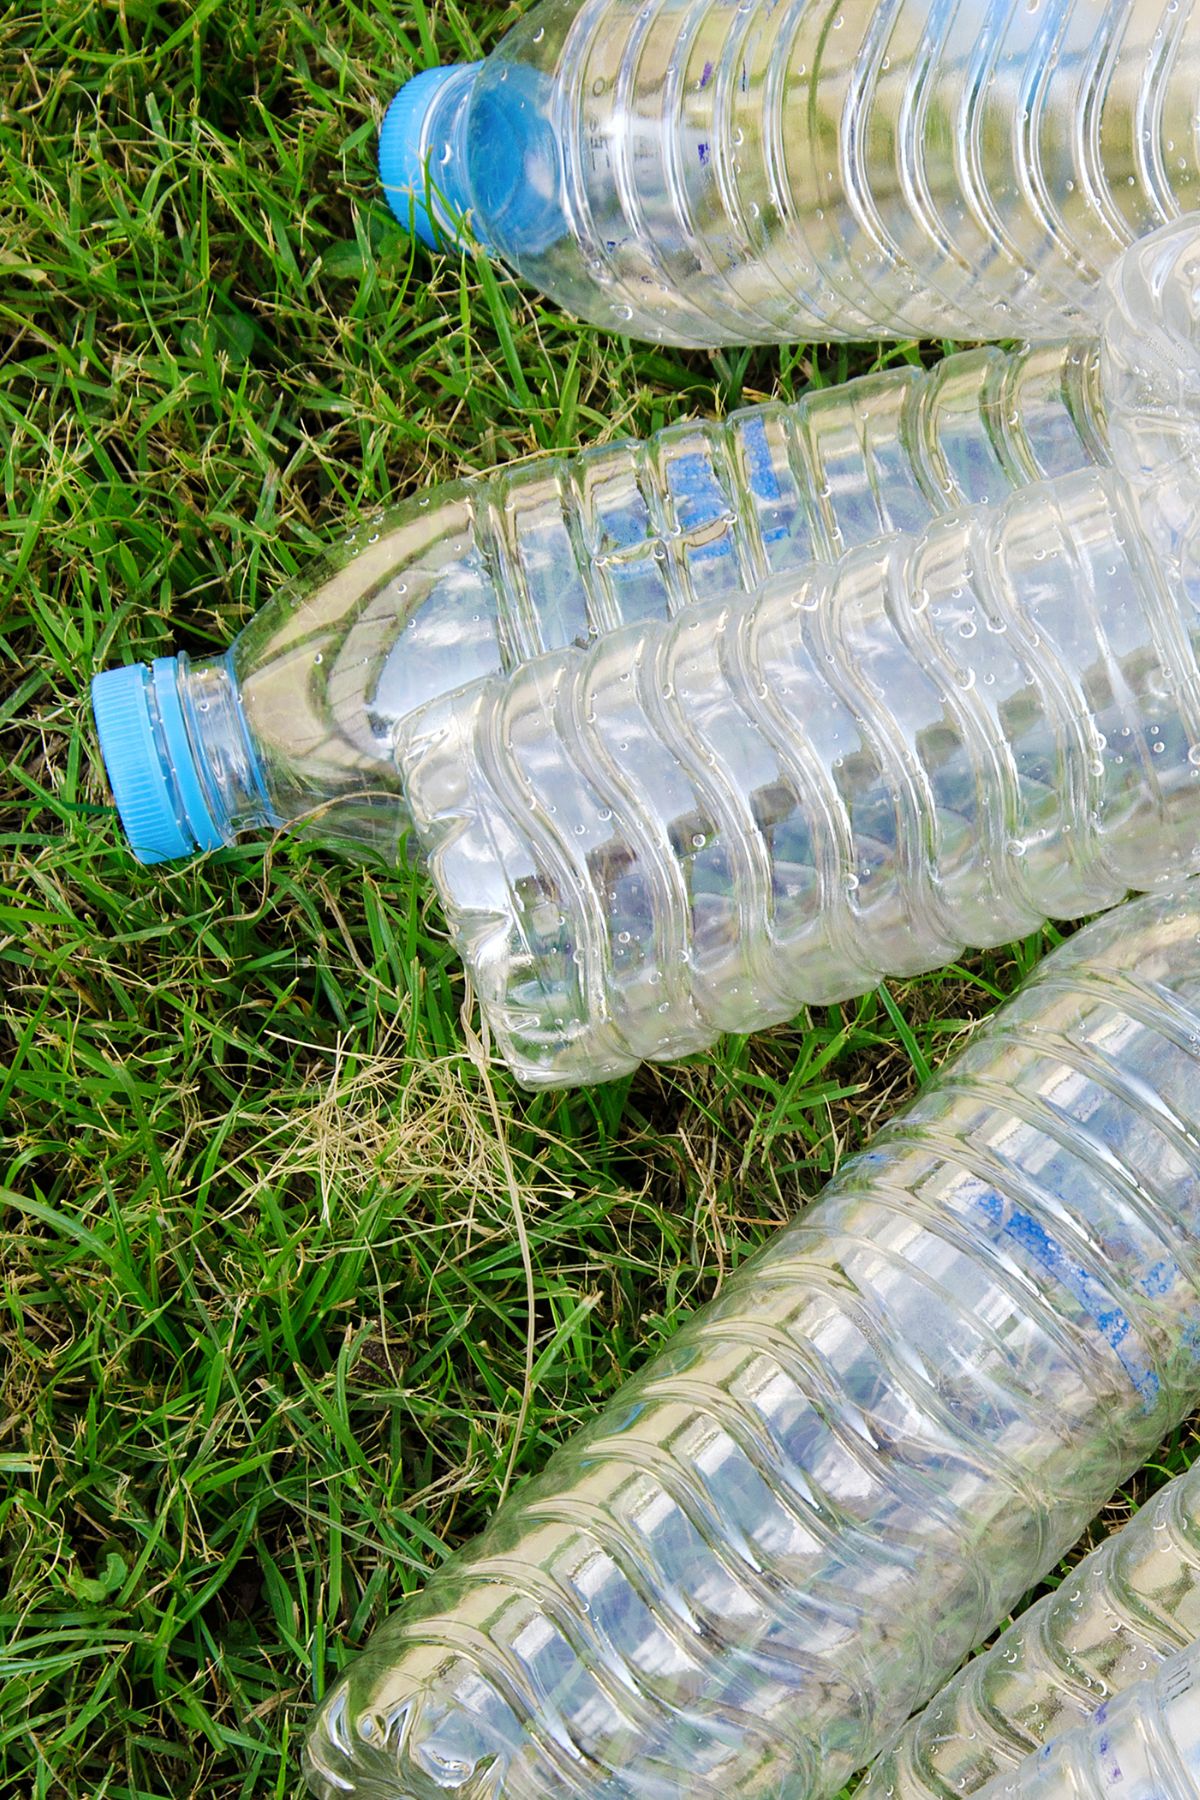 used plastic bottles laying in the grass.